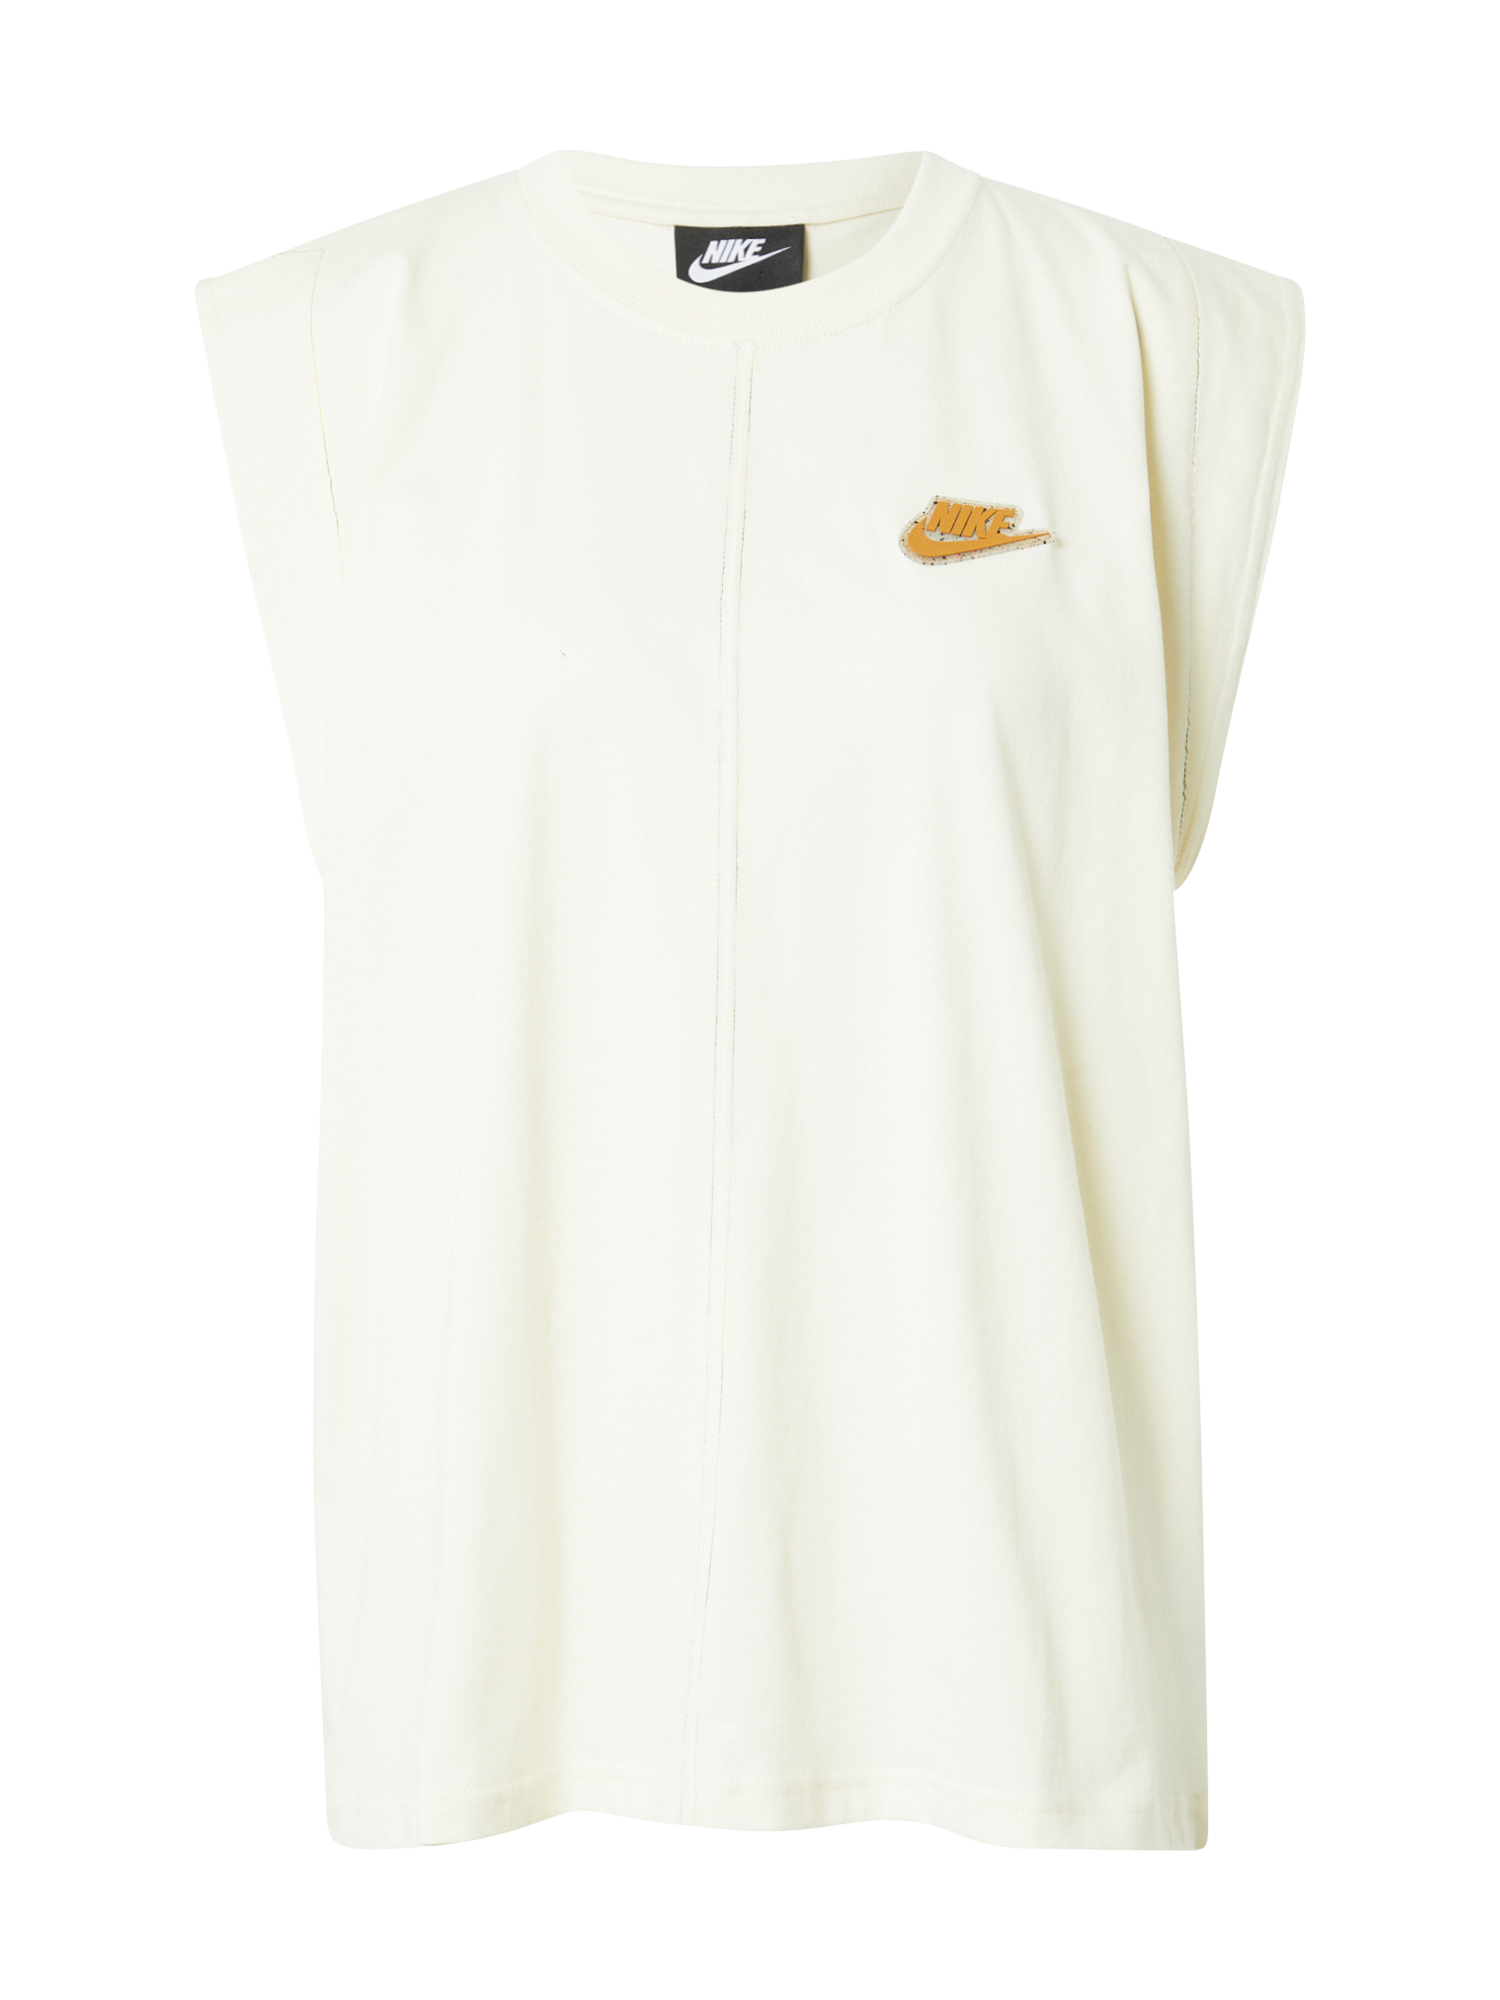 Taglie comode Donna Nike Sportswear Top Earth Day in Bianco Naturale 